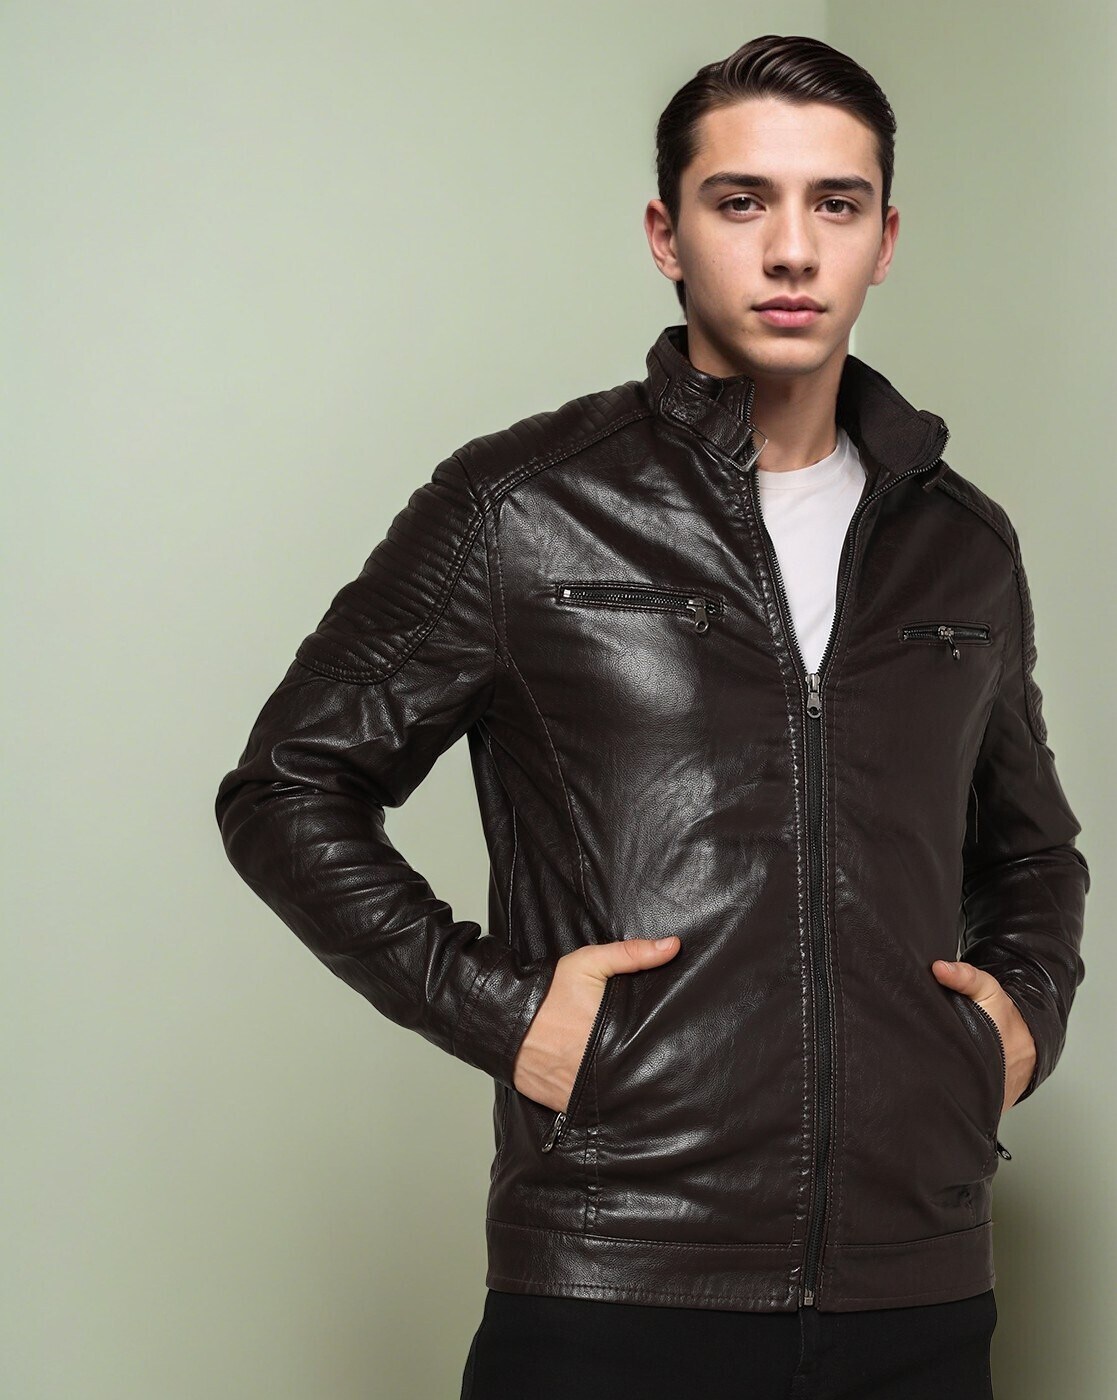 Men's varsity style jackets manufacturers and exporters | PPT